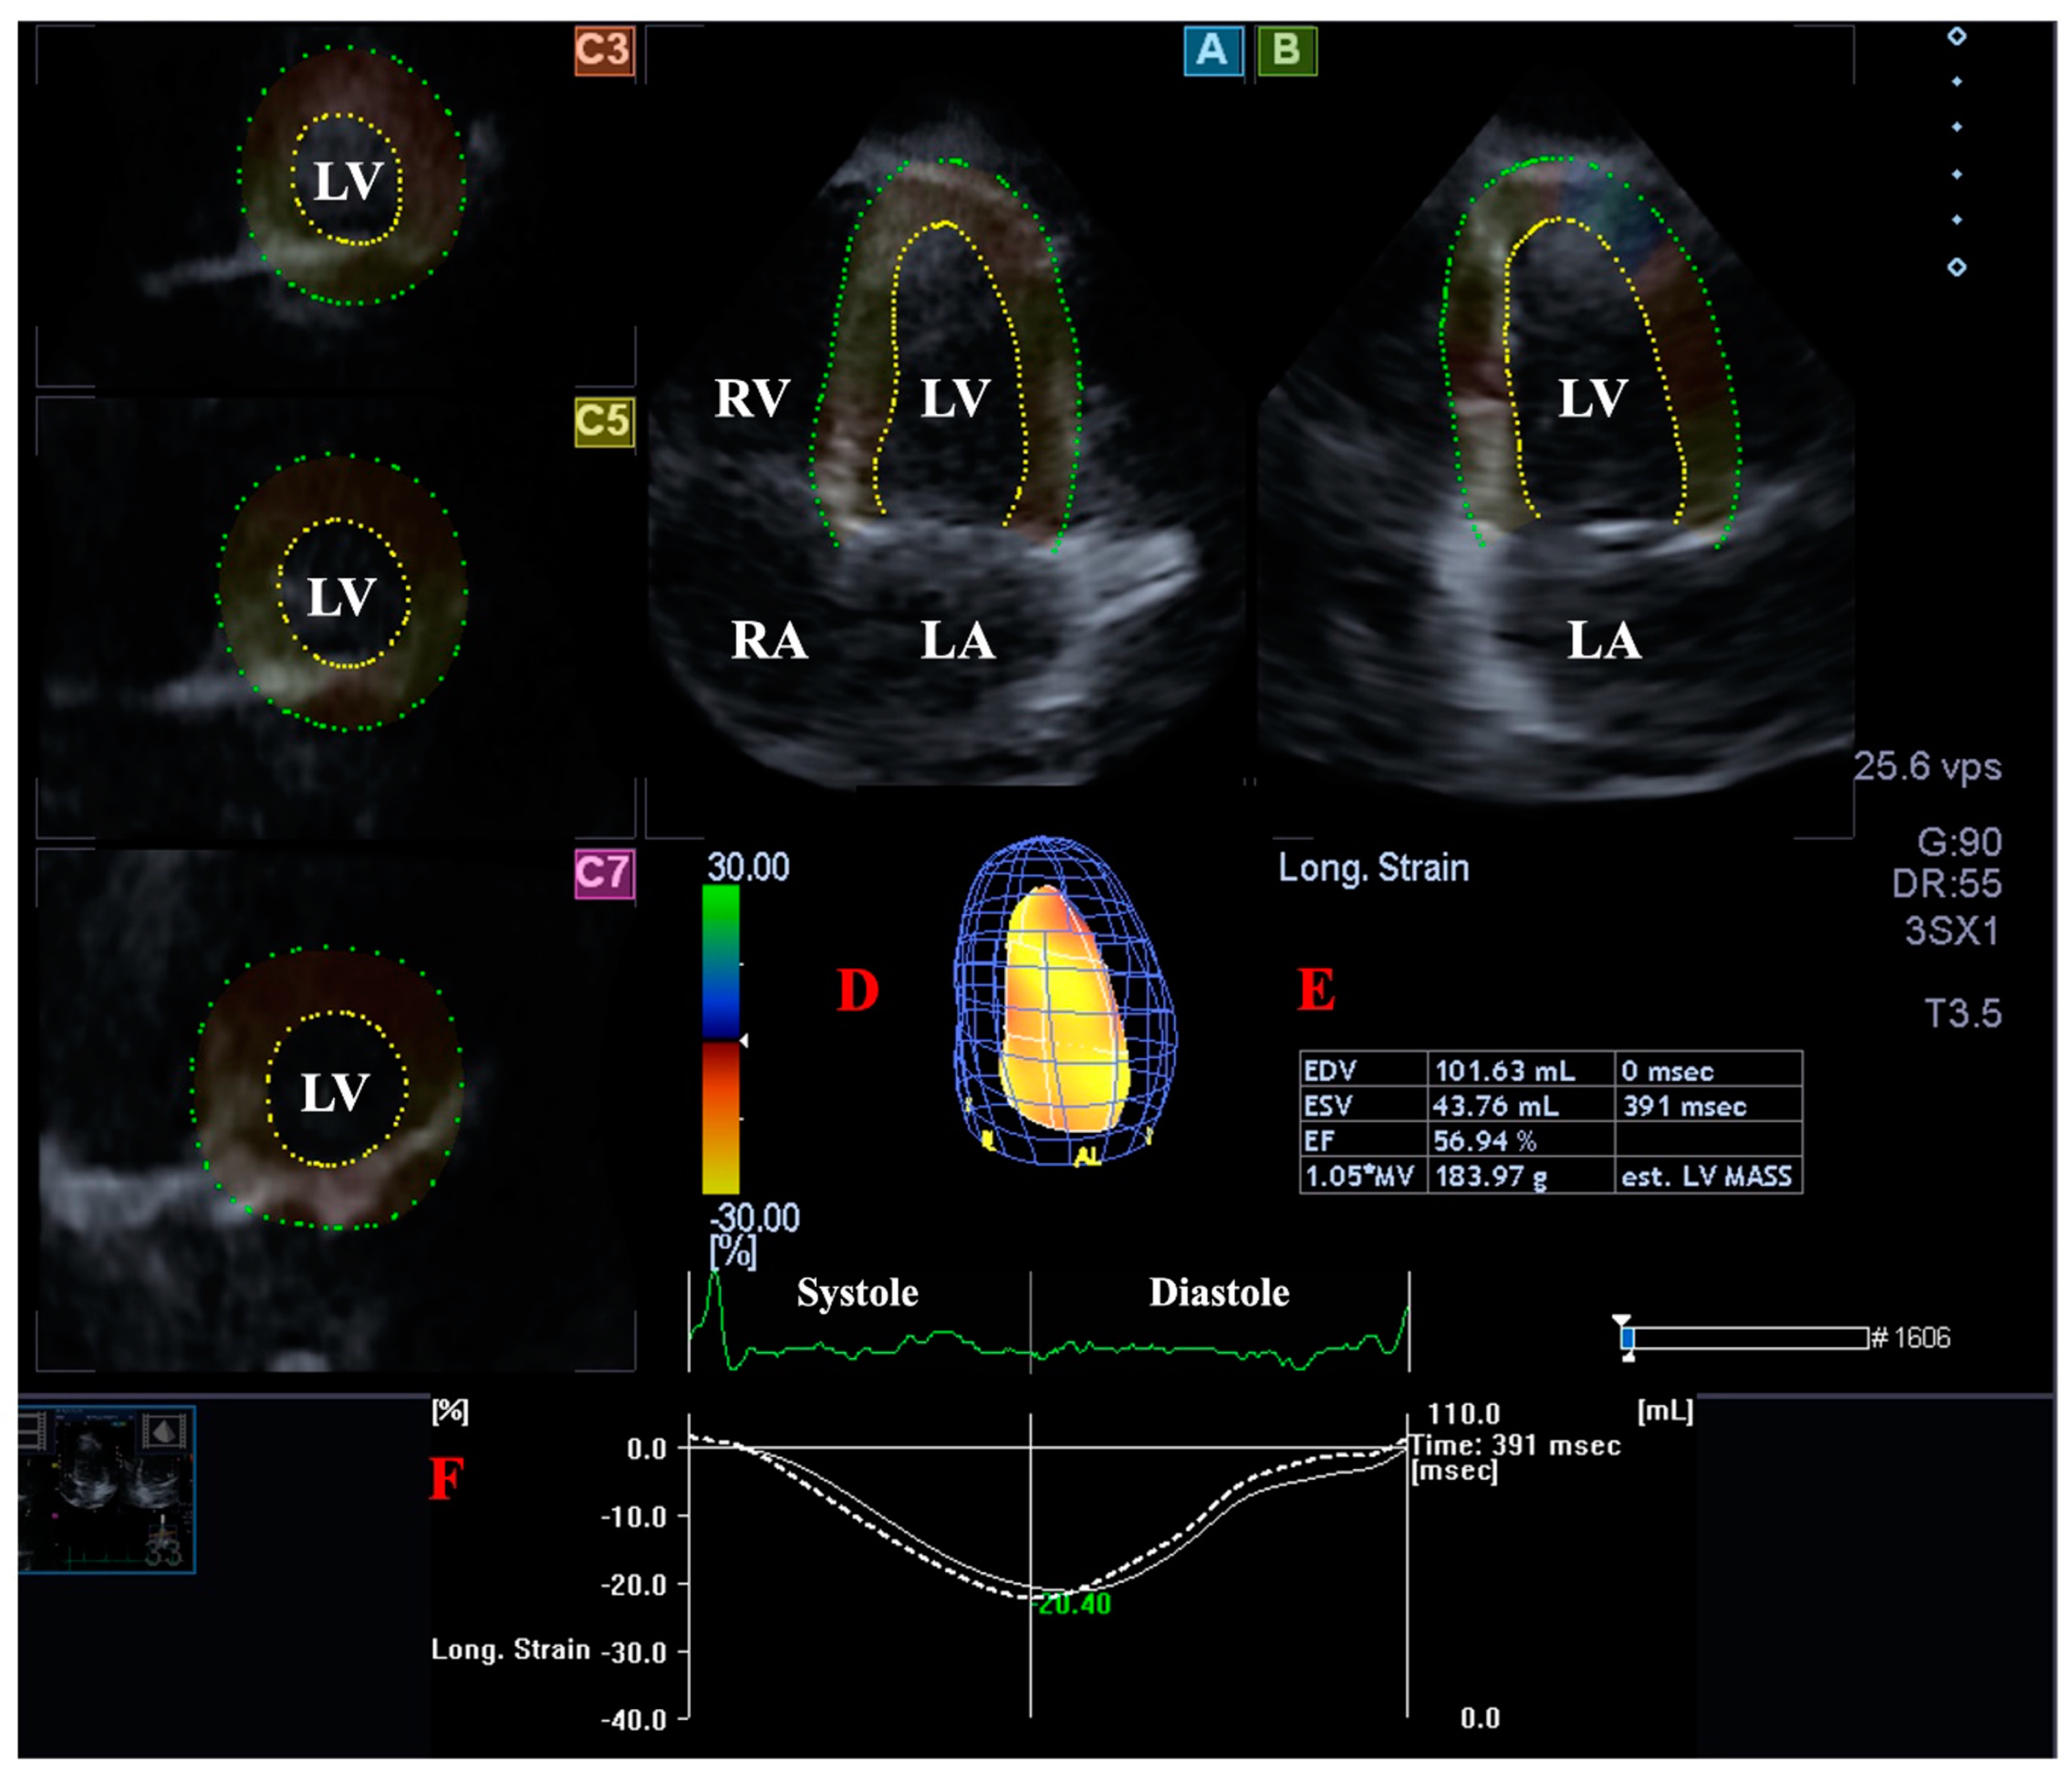 Speckle tracking echocardiography to assess regional ventricular function  in patients with apical hypertrophic cardiomyopathy